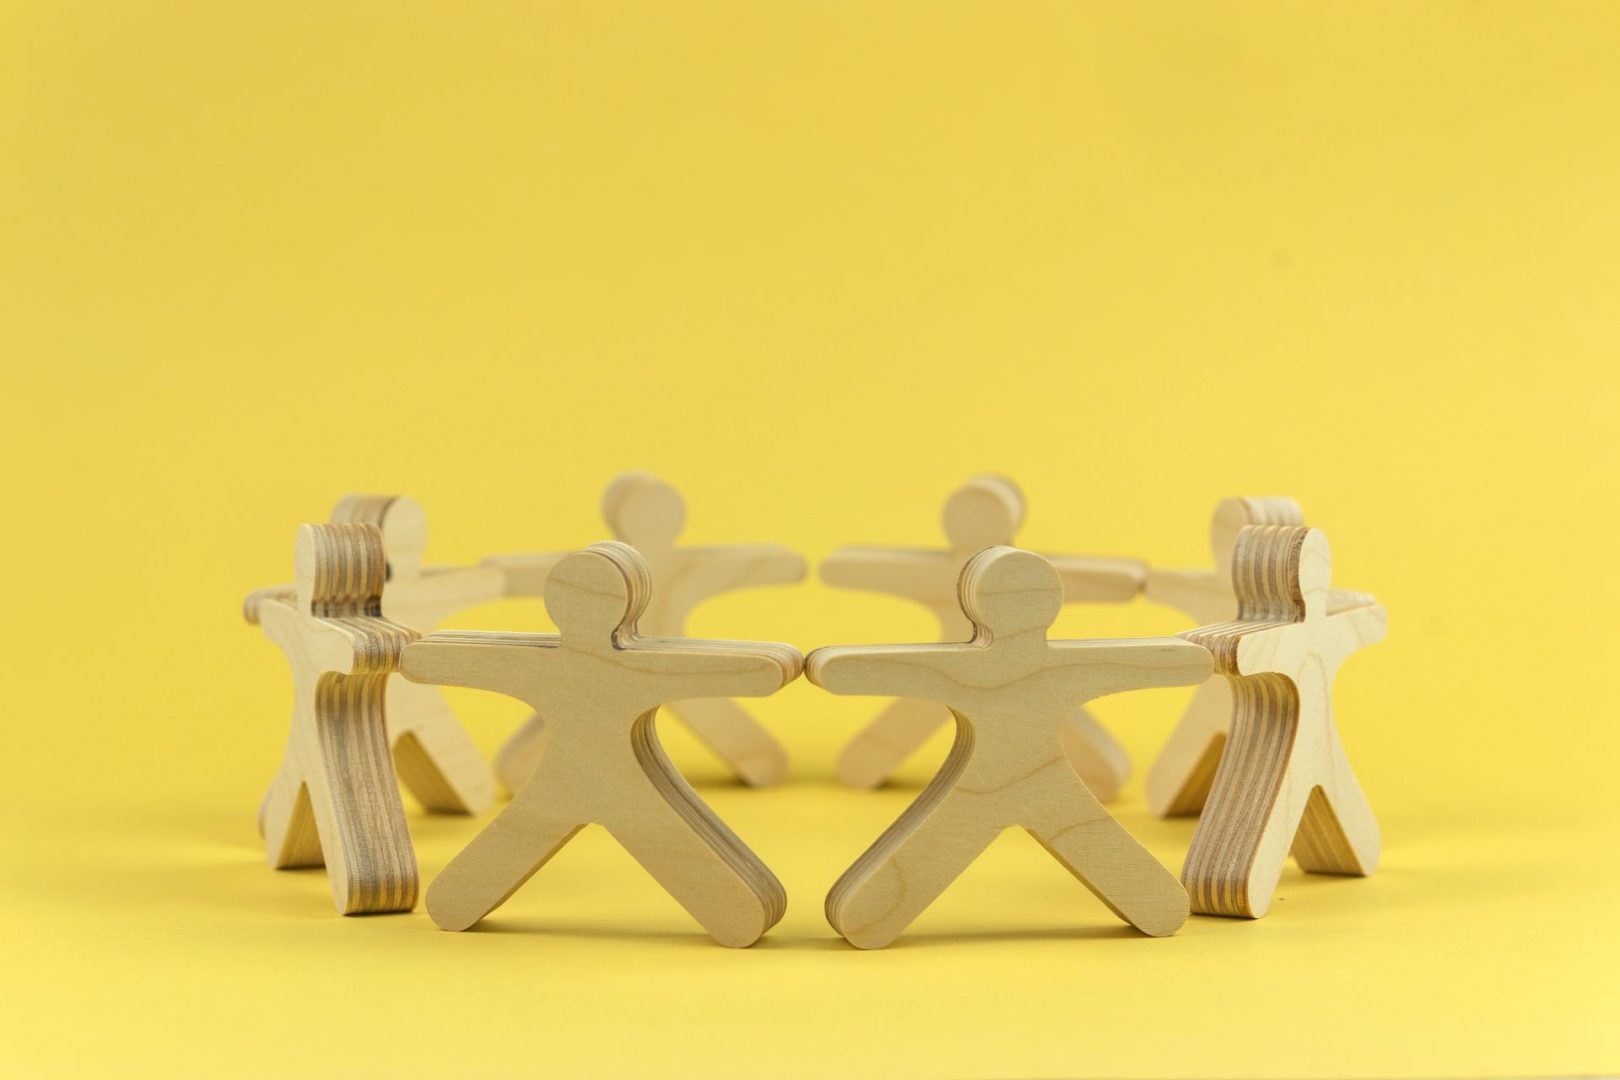 wooden figures stood holding hands in a circle. Yellow background